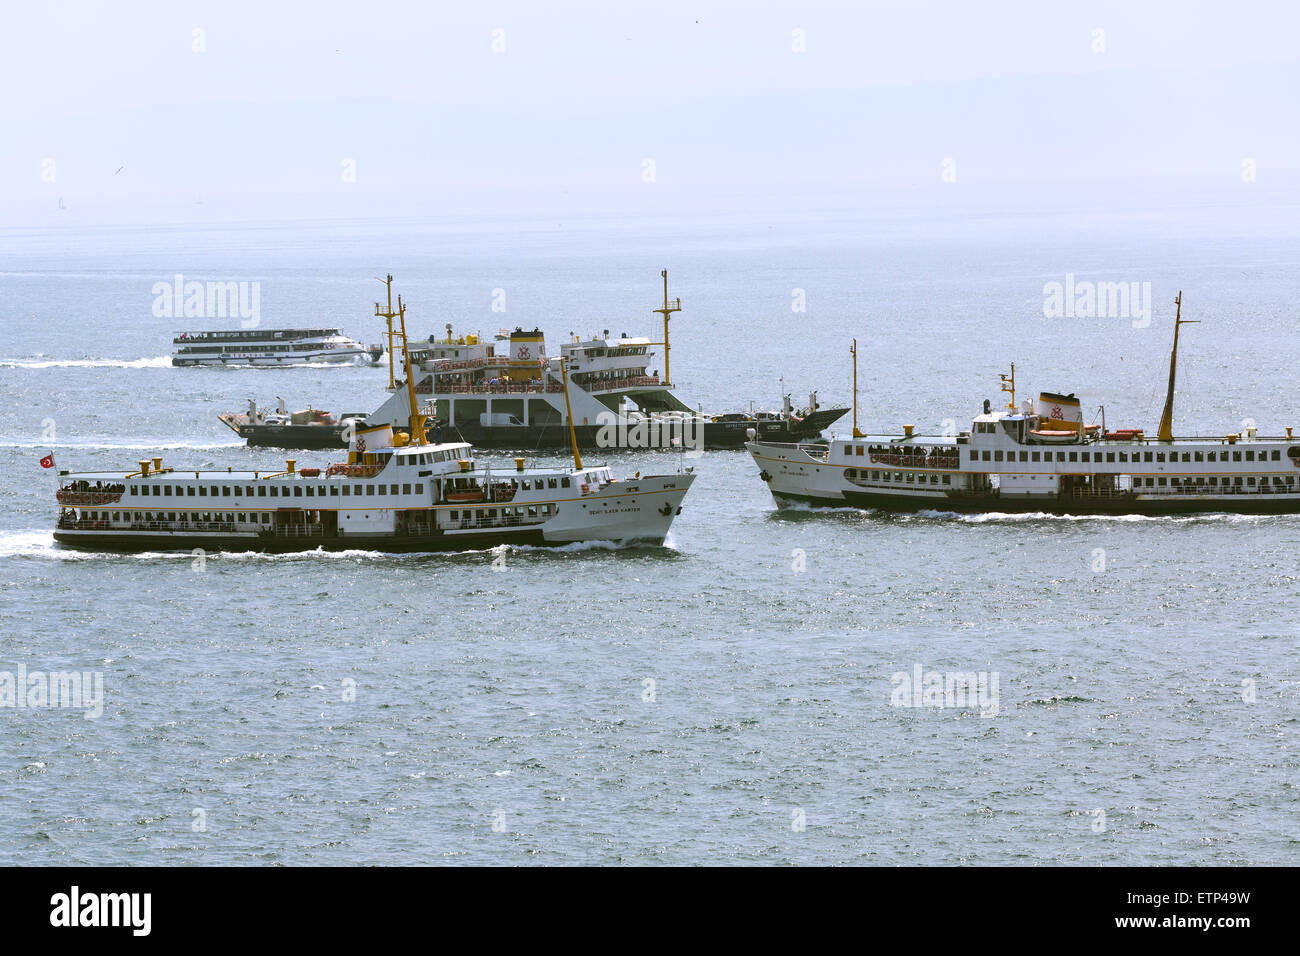 Ferries in the Crowded congested waters of the port of Istanbul Turkey Stock Photo